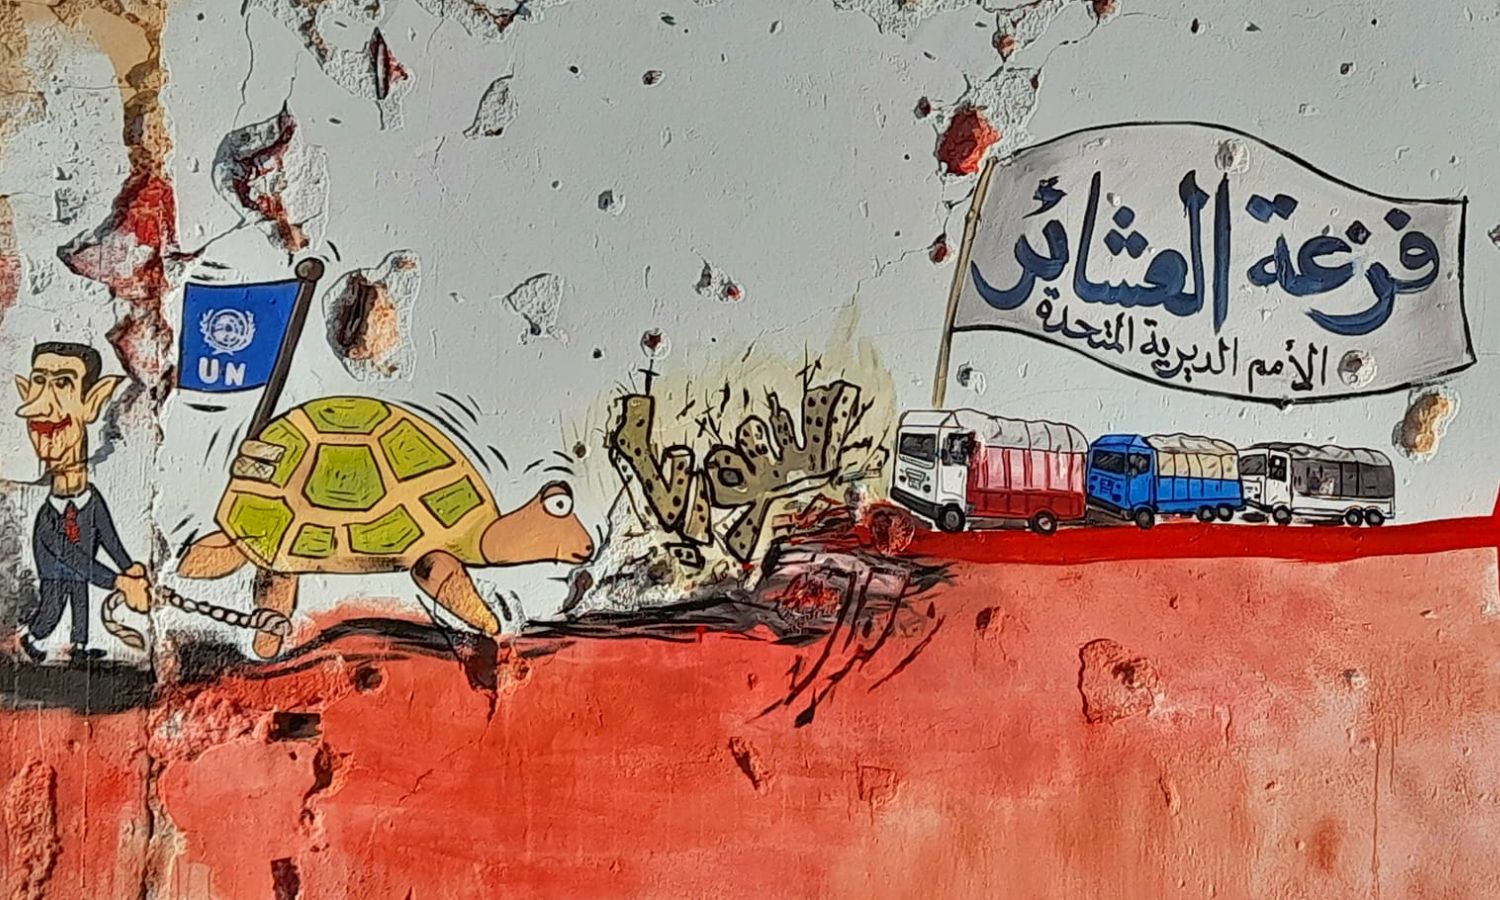 A mural in northern Syria of a relief convoy from Deir Ezzor tribes for the affected people by the earthquake in northwestern Syria, by artists Aziz Asmar and Anis Hamdoun - February 14, 2023 (Facebook/Aziz Asmar)